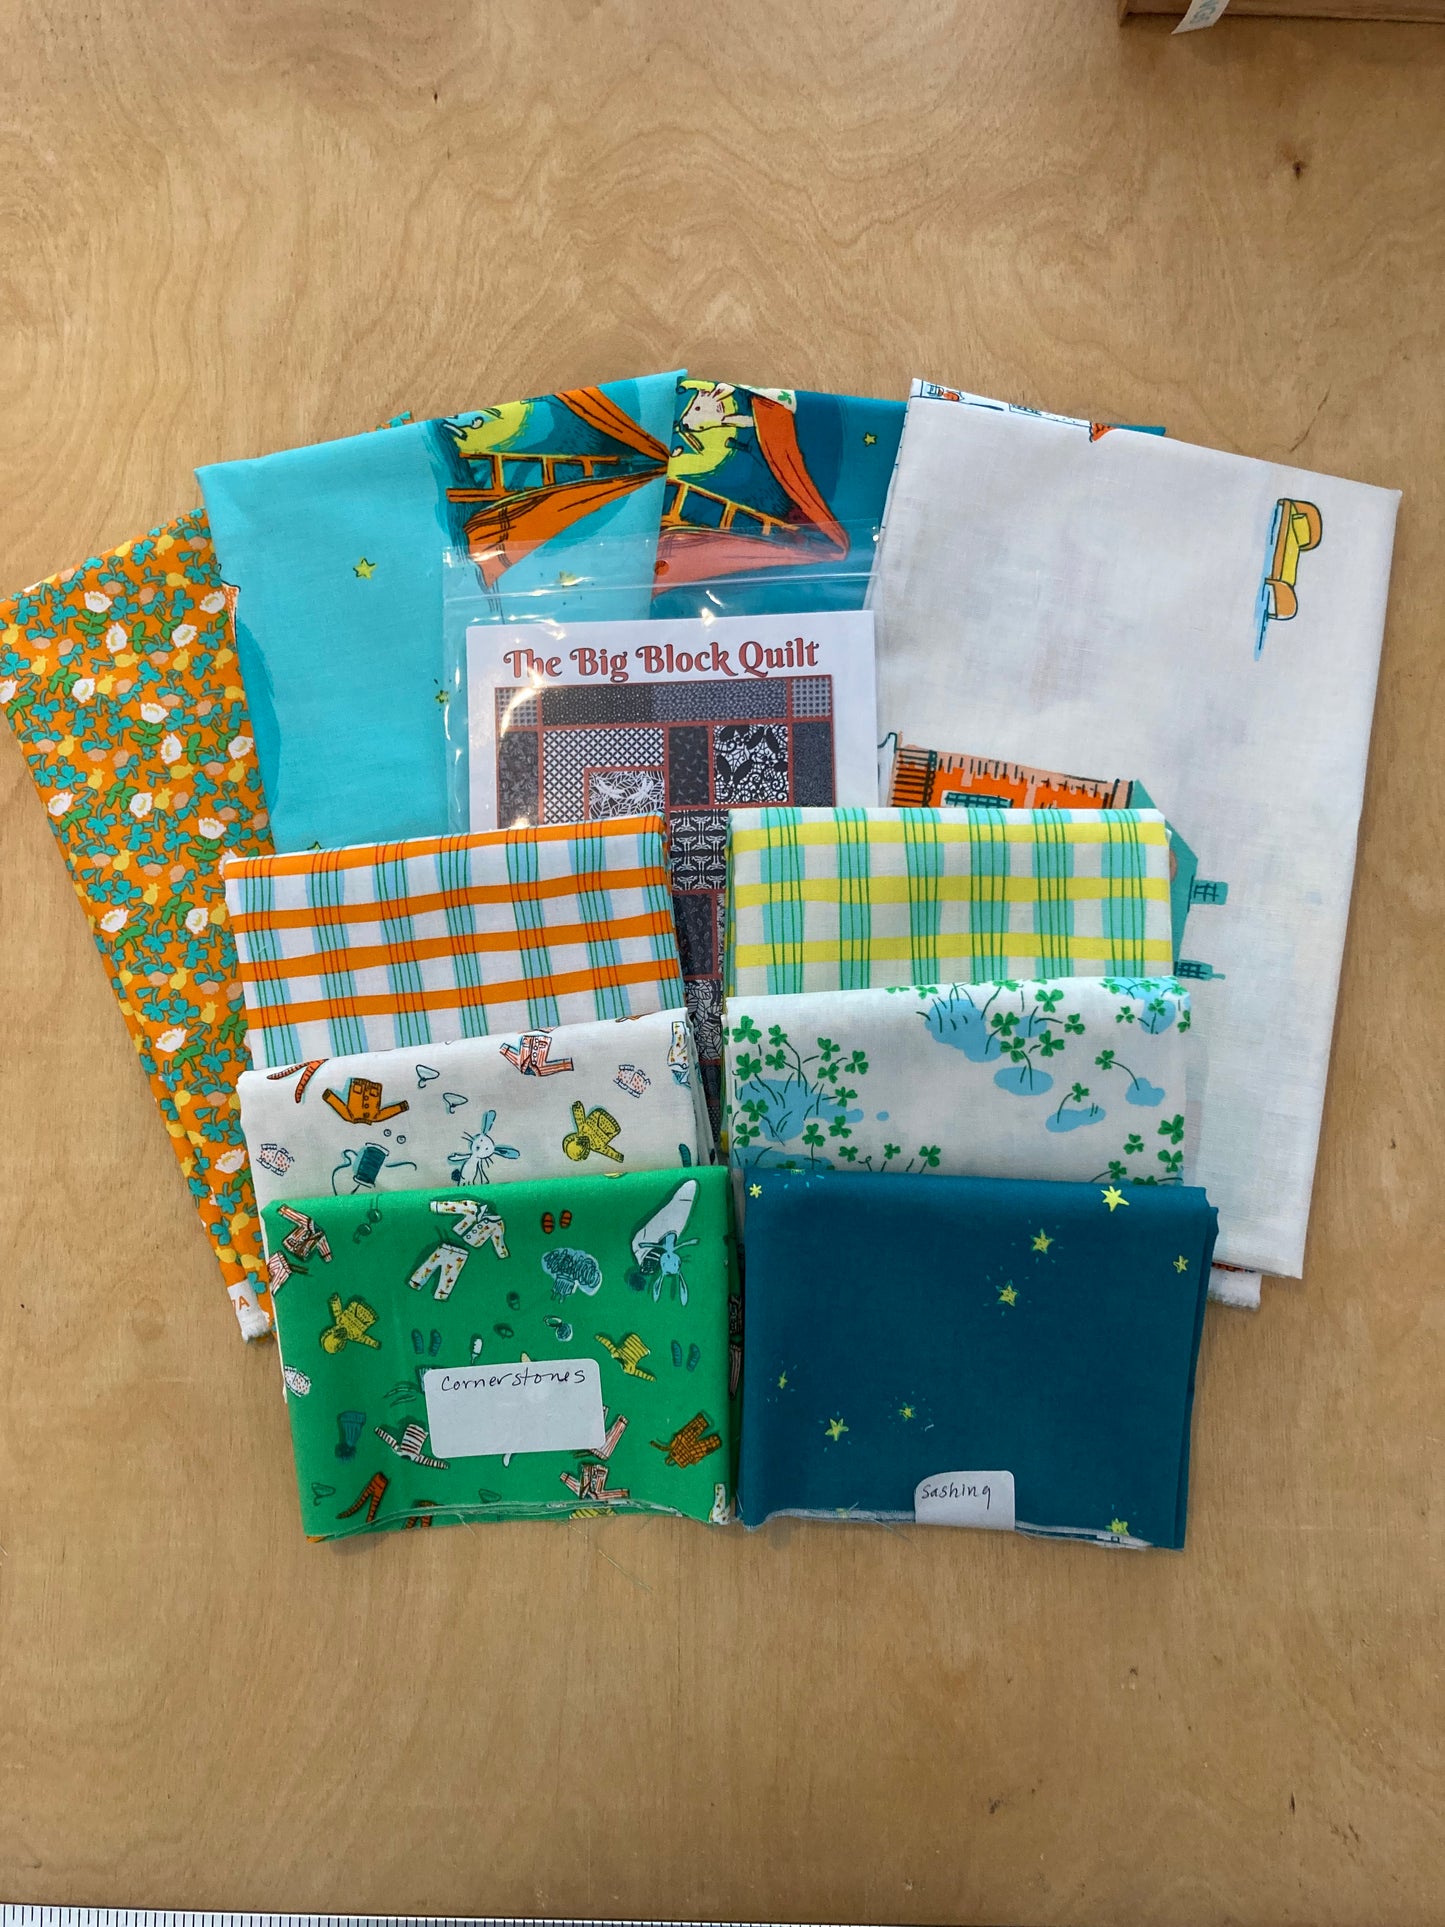 precut fabric in greens, blues and oranges with a quilt pattern